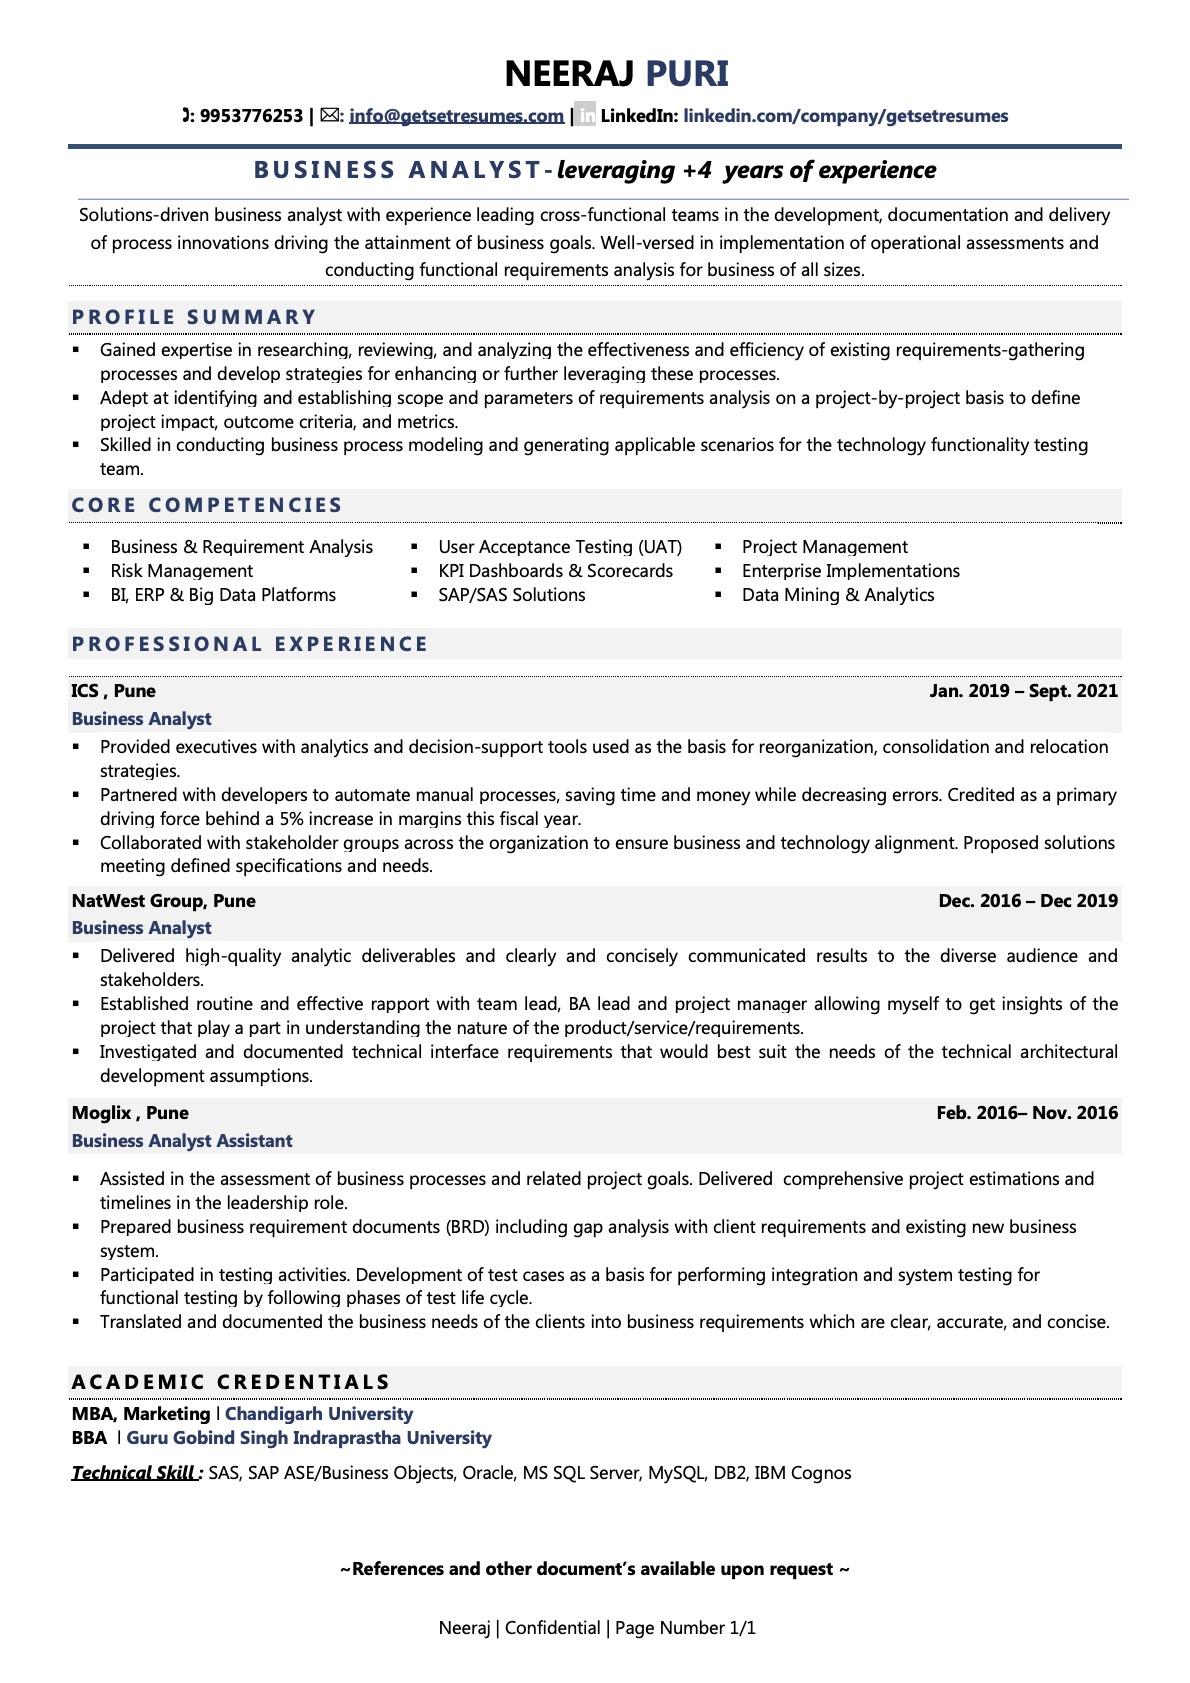 Business Analyst - Resume Example & Template